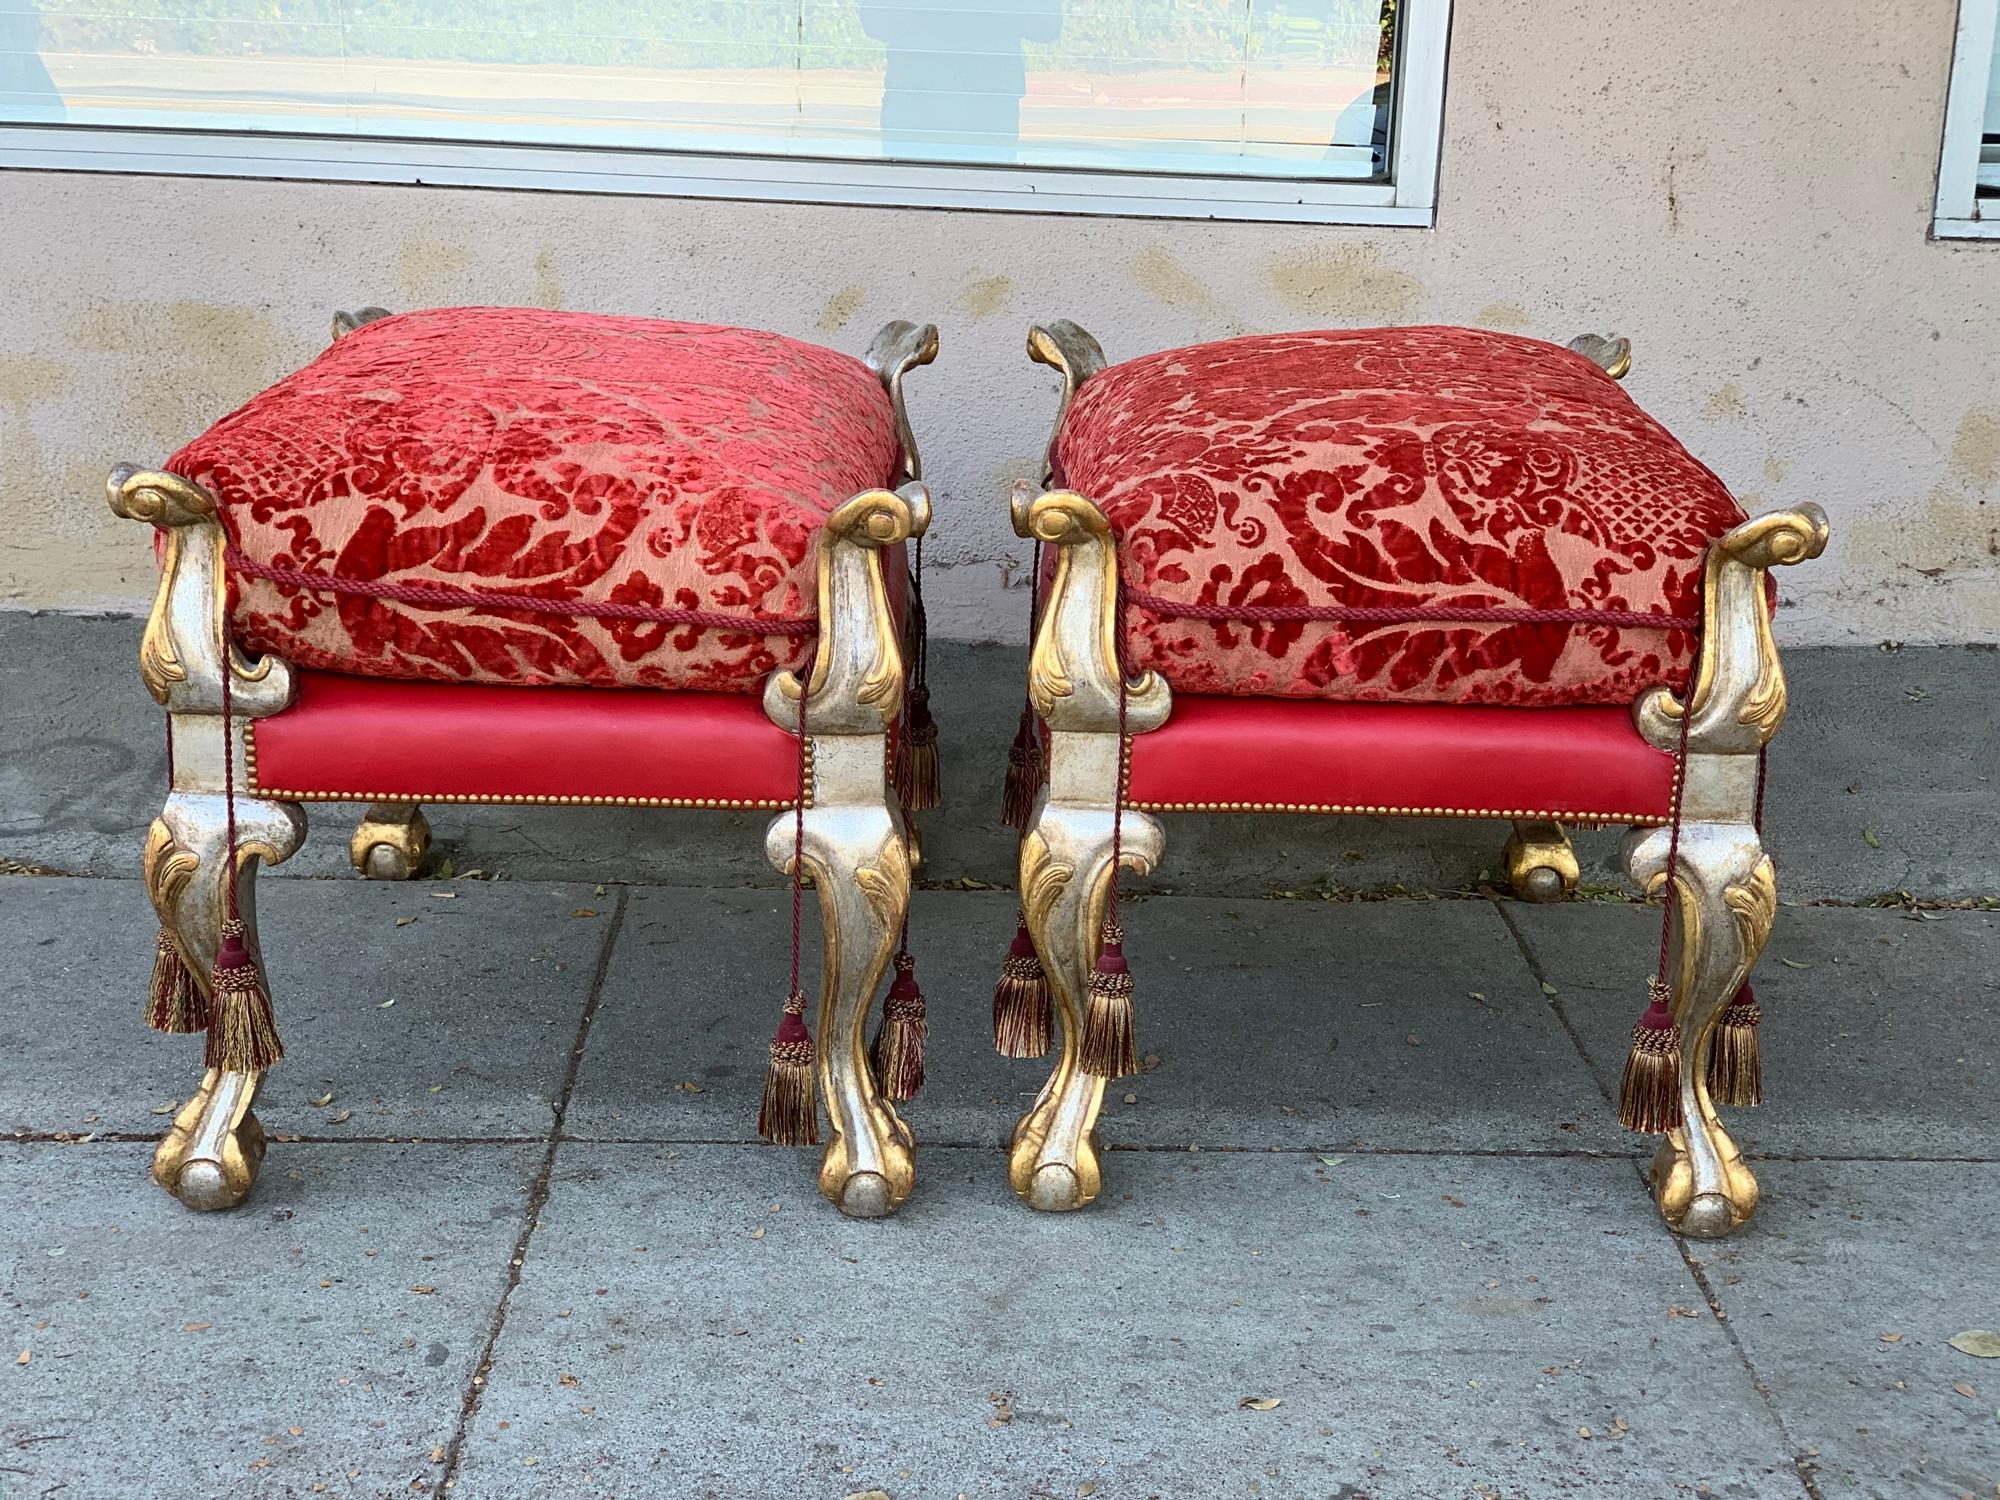 Beautiful pair of vintage Empire style benches with a gold and silver gilded frames, carved paws and eagle like carved finials, upholstered in a vintage silk material.
The benches are in very good vintage condition with minor wear to fabric and